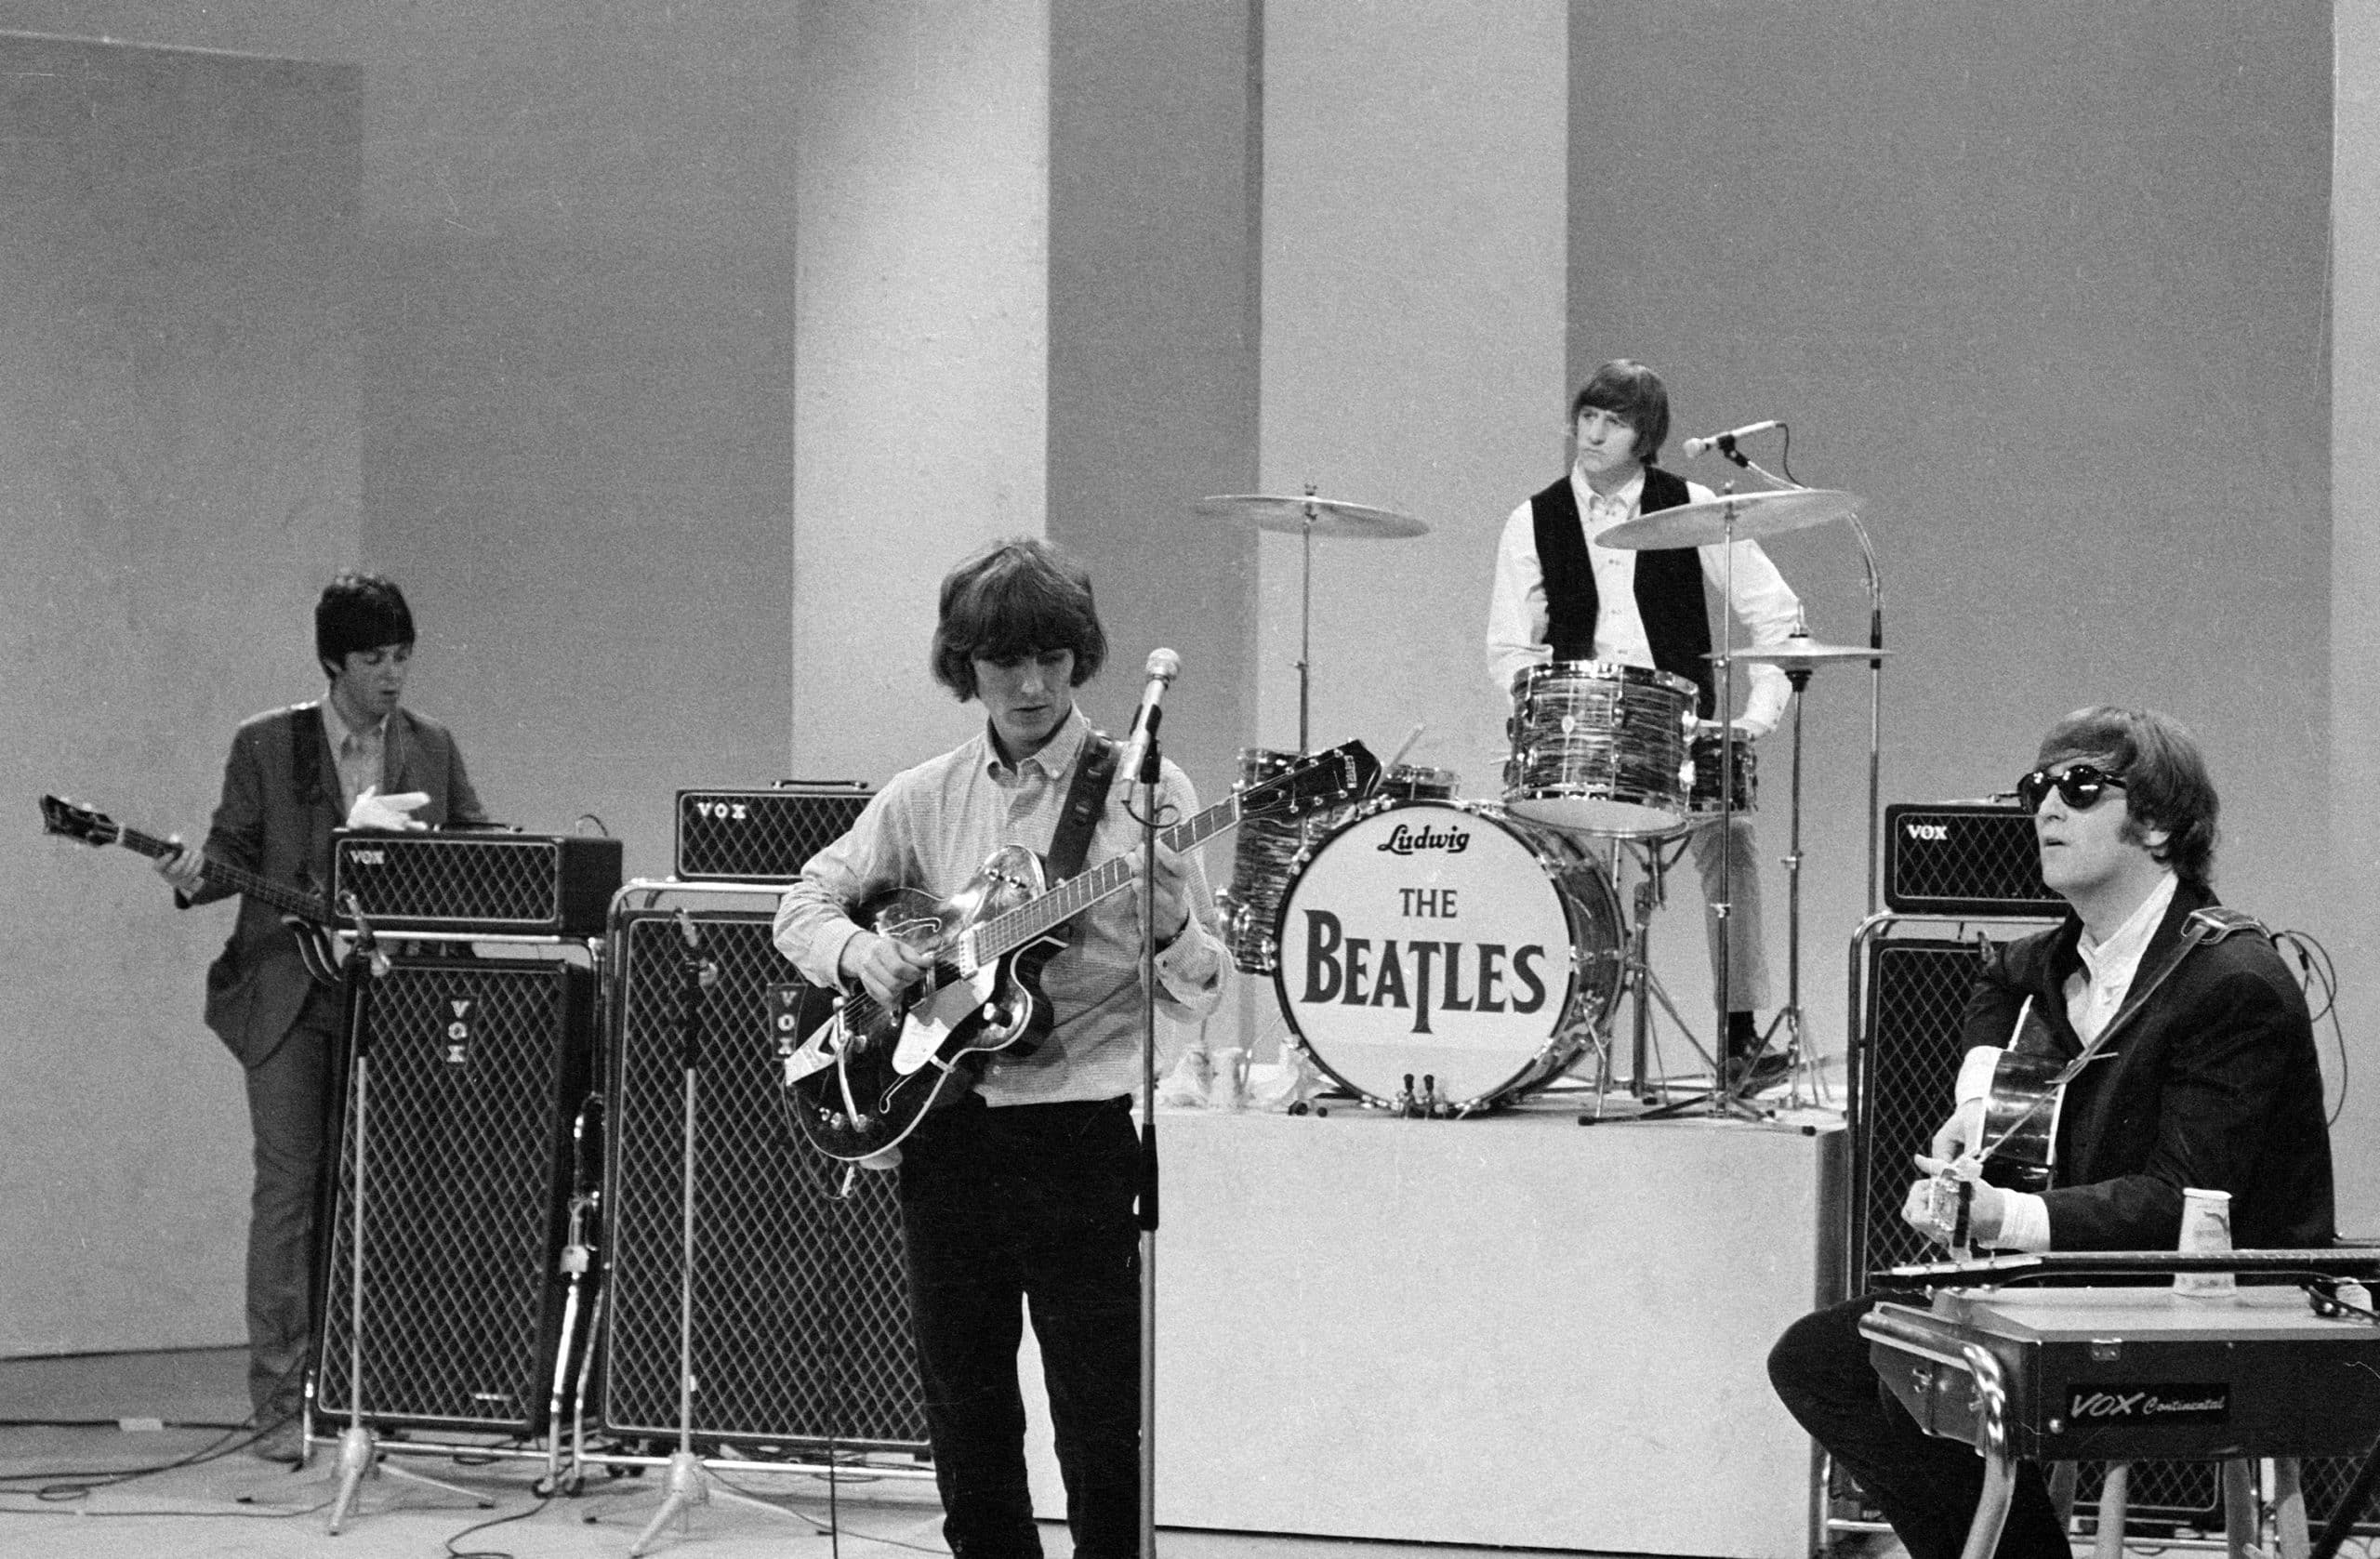 A Study Says The Beatles Didn’t Really Spark The Musical Revolution In America ...3000 x 1965